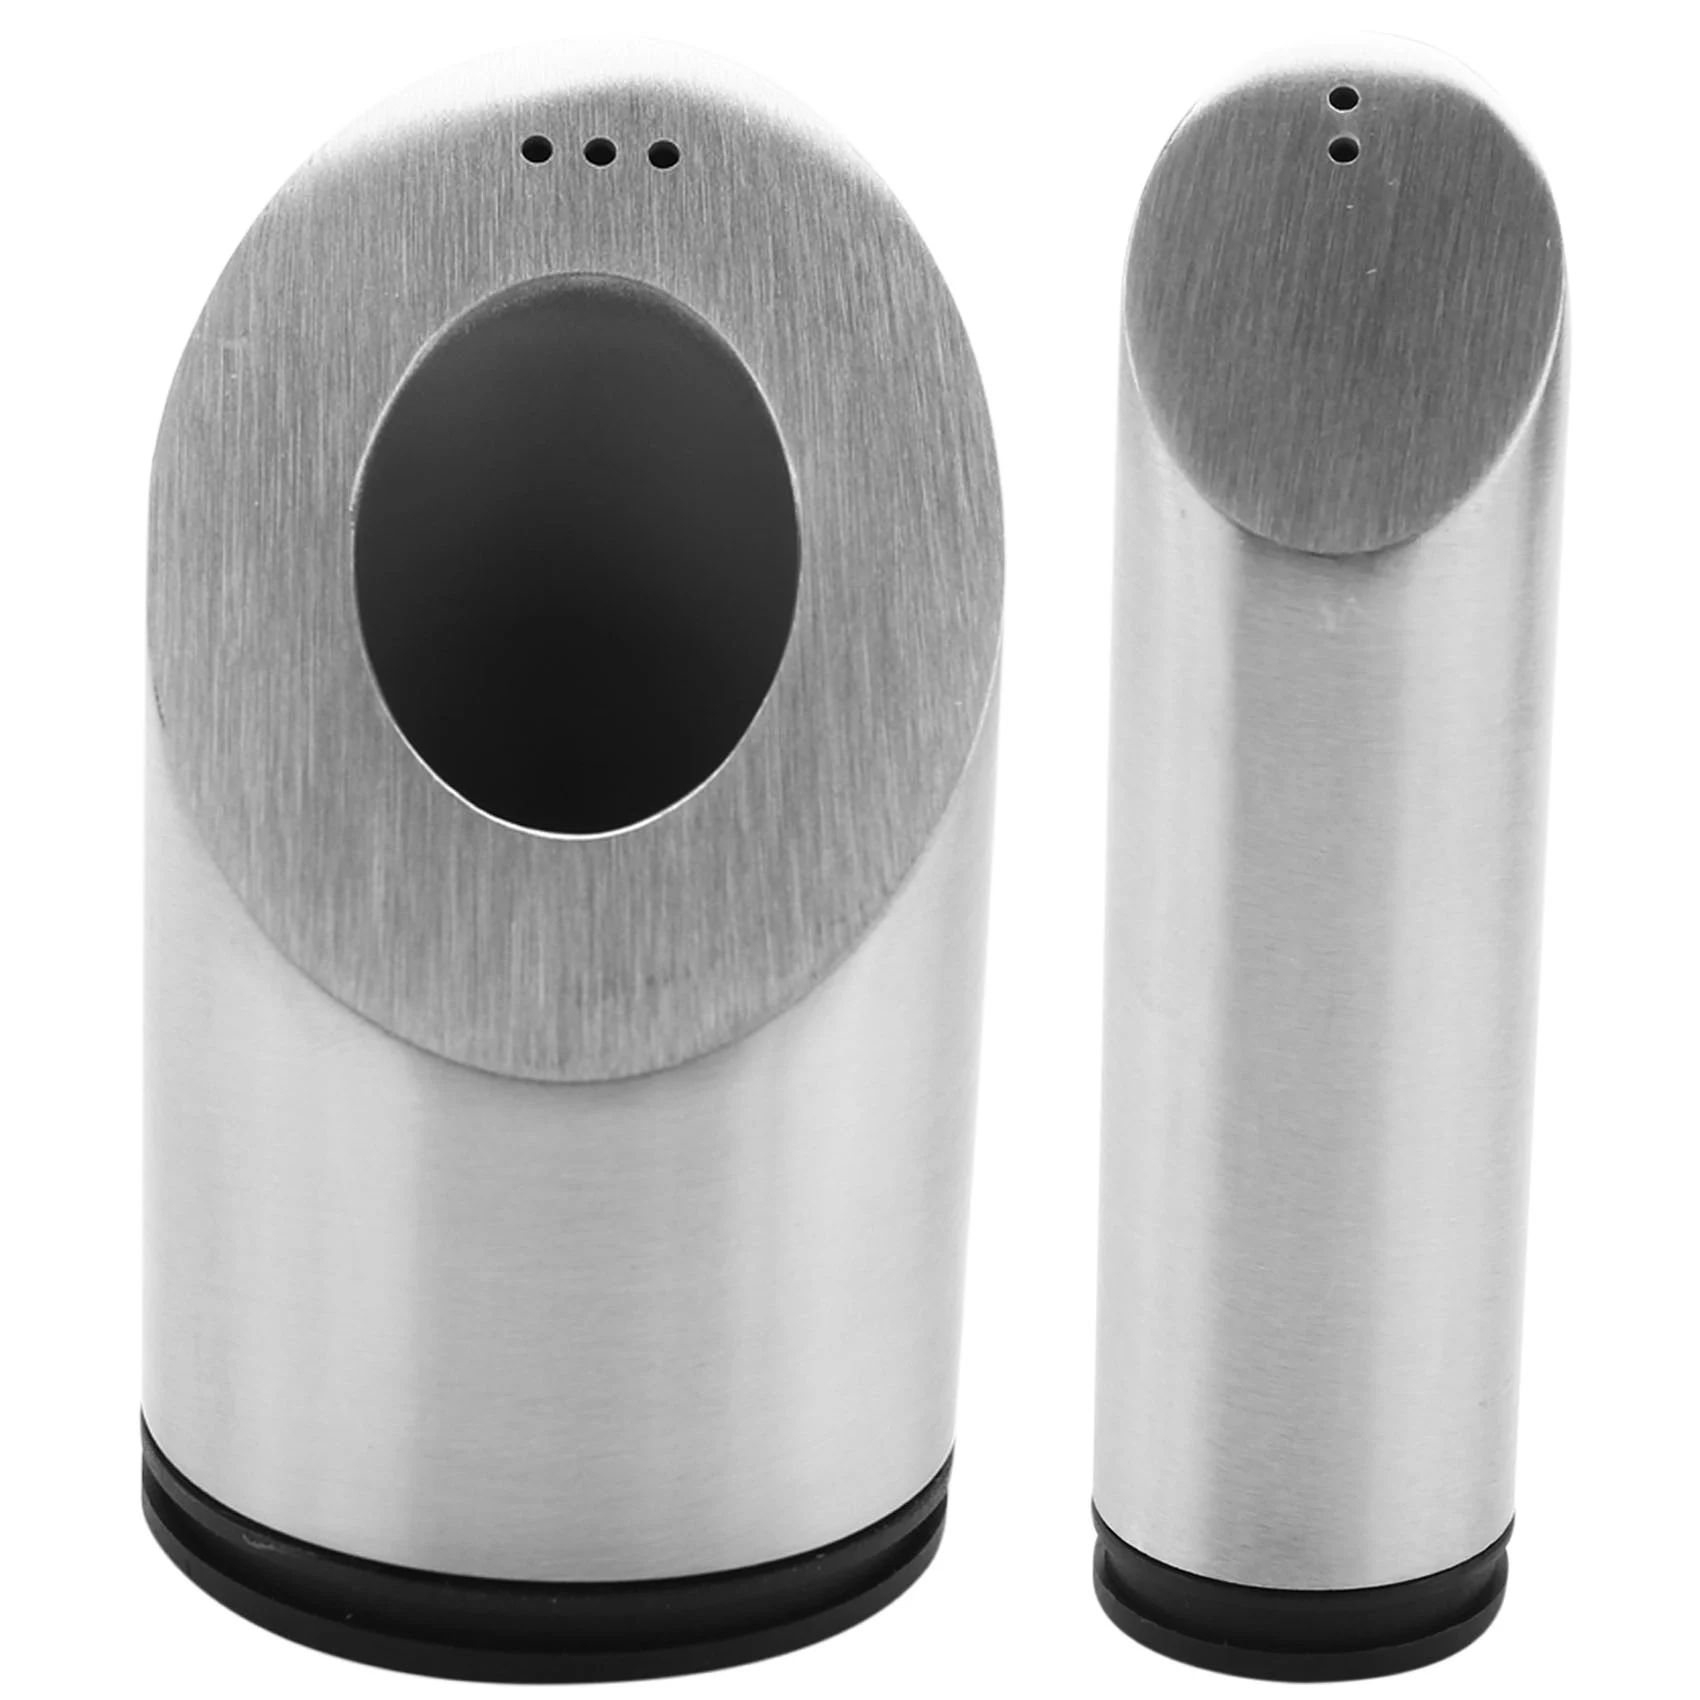 

1Pcs Stainless Steel Salt And Pepper Shakers Set For Spices With Holes Seasoning Jar Spice Rack Kitchen Cruet Tool